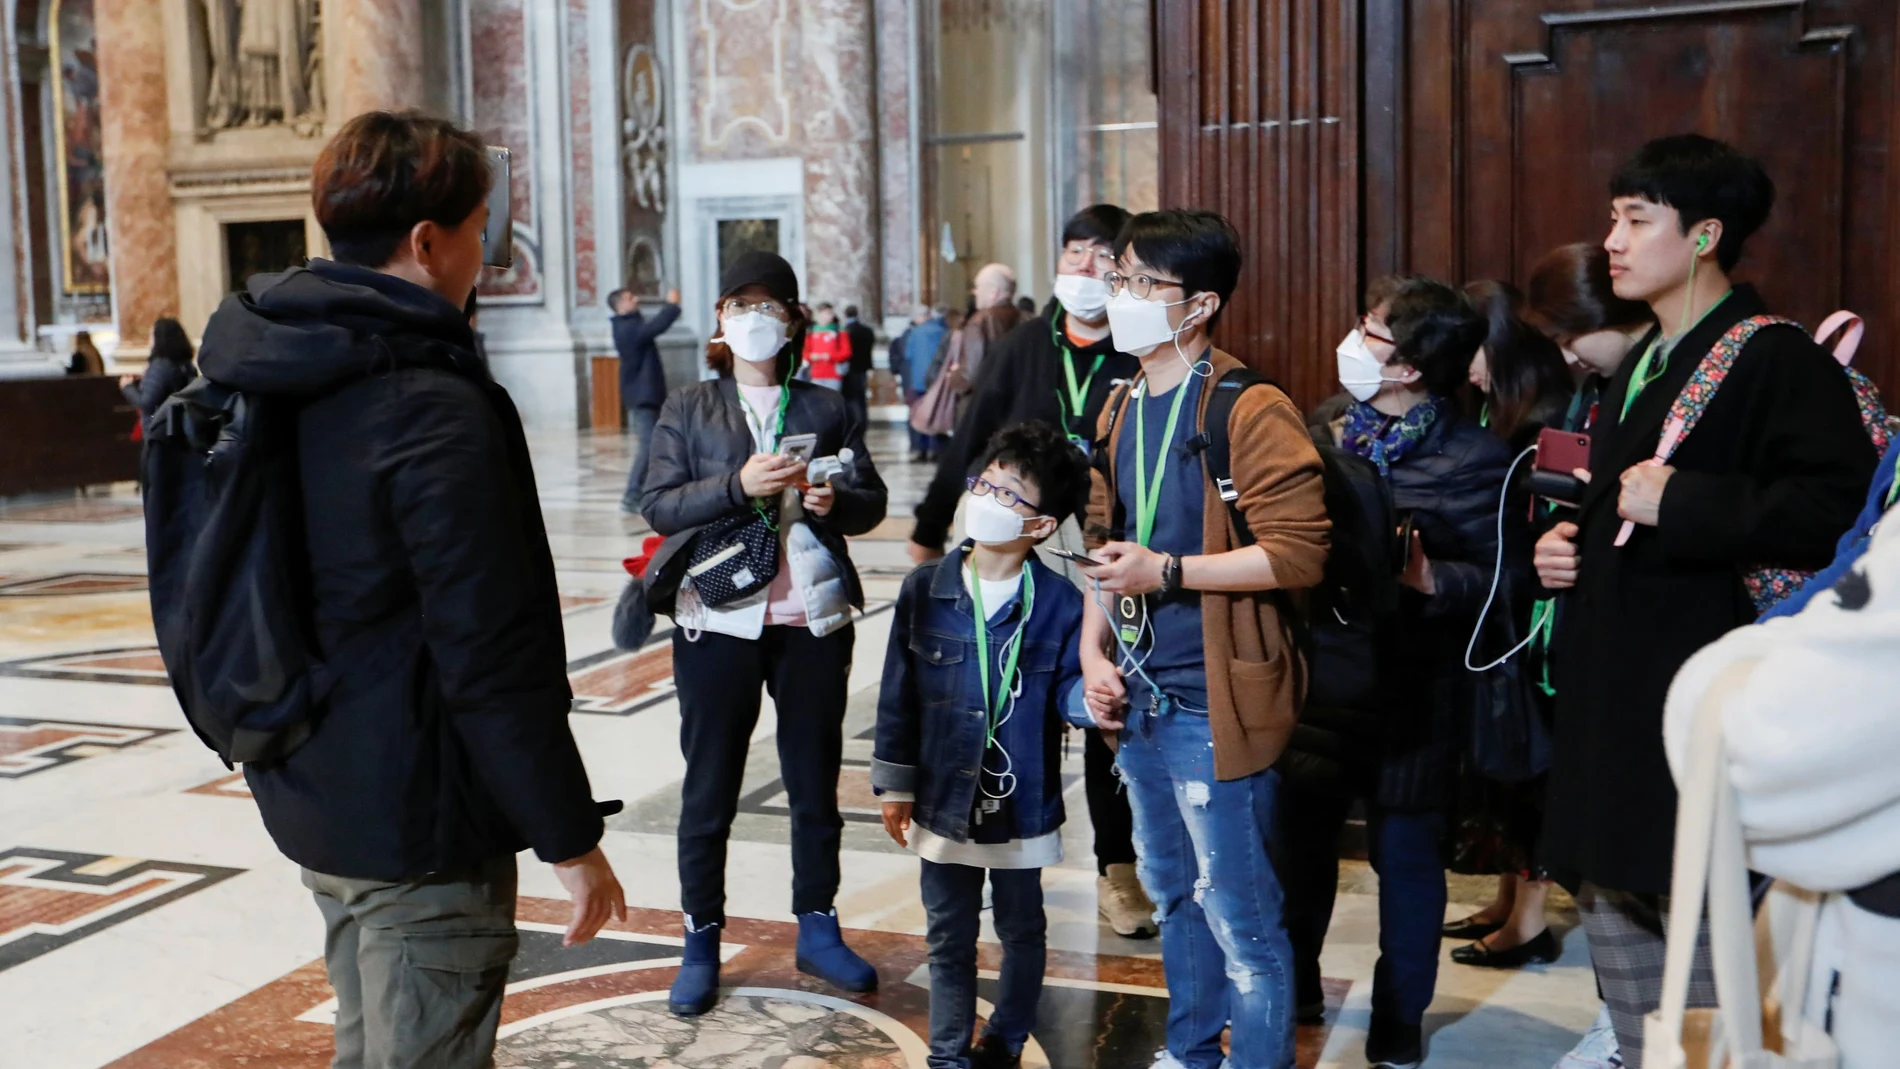 Tourists wearing protective face masks visit the St. Peter's Basilica, after the Vatican reports its first case of coronavirus, at the Vatican